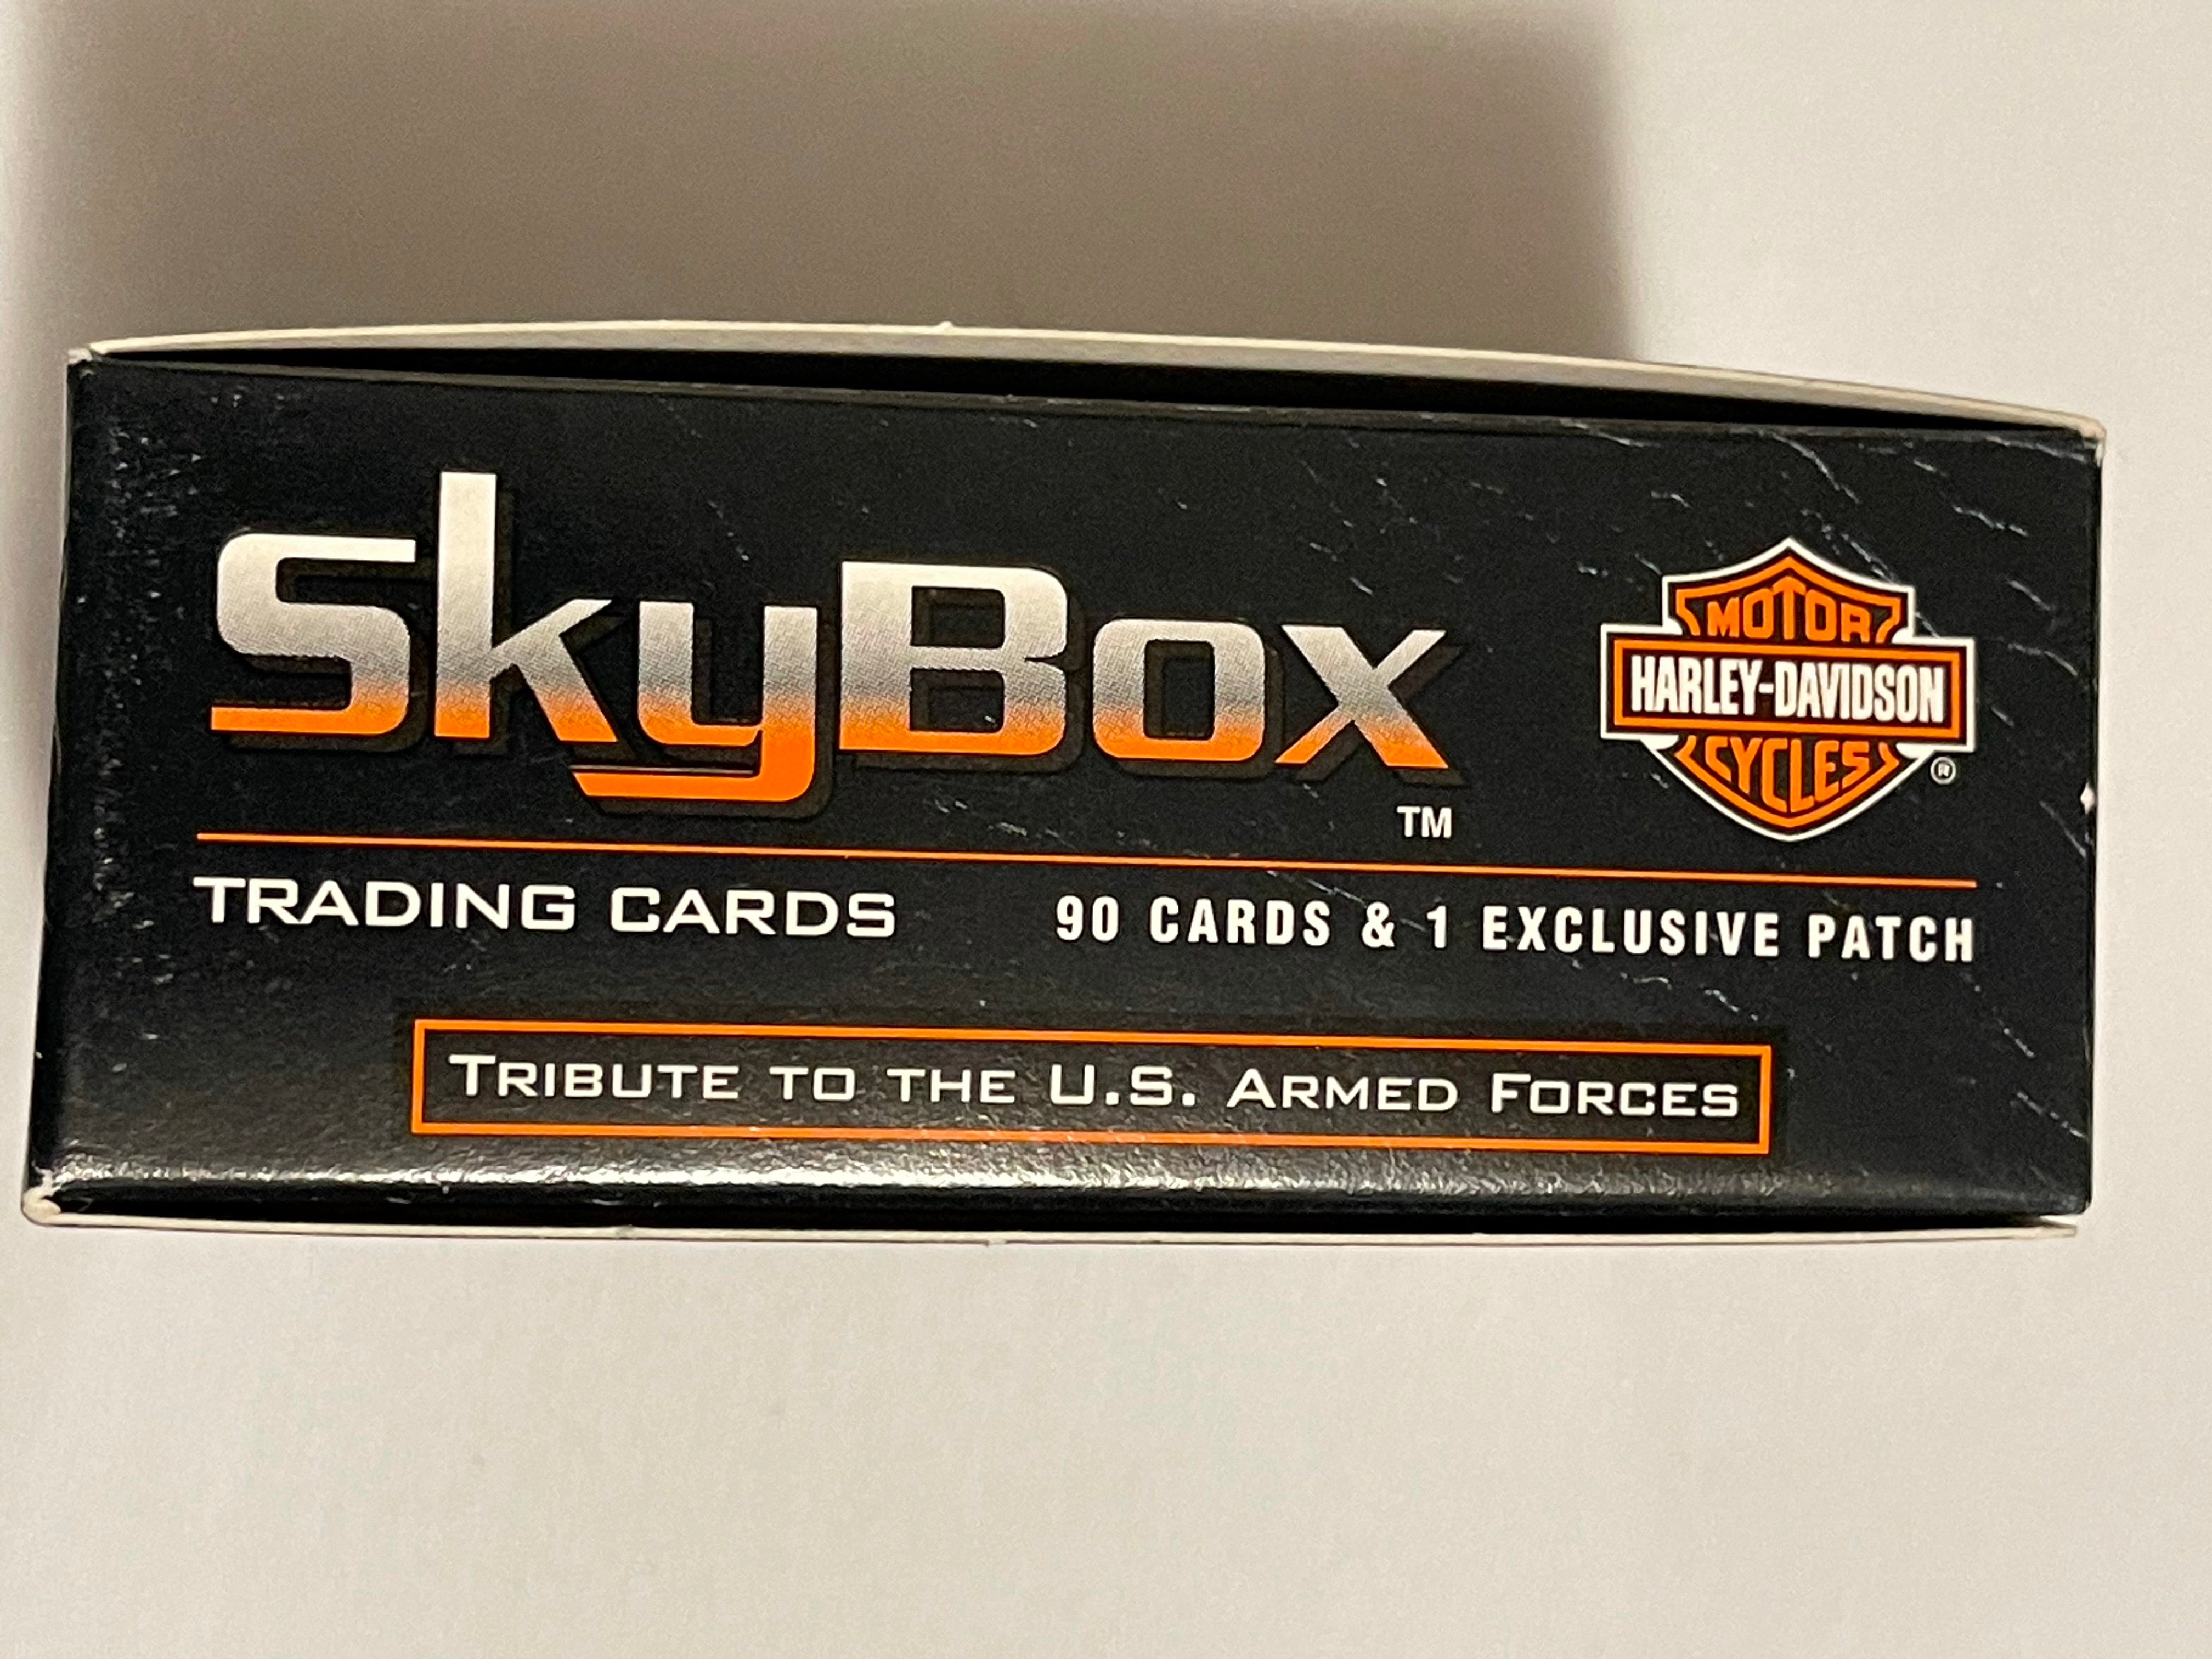 Harley-Davidson motorcycle Skybox cards set with patch box set 1994